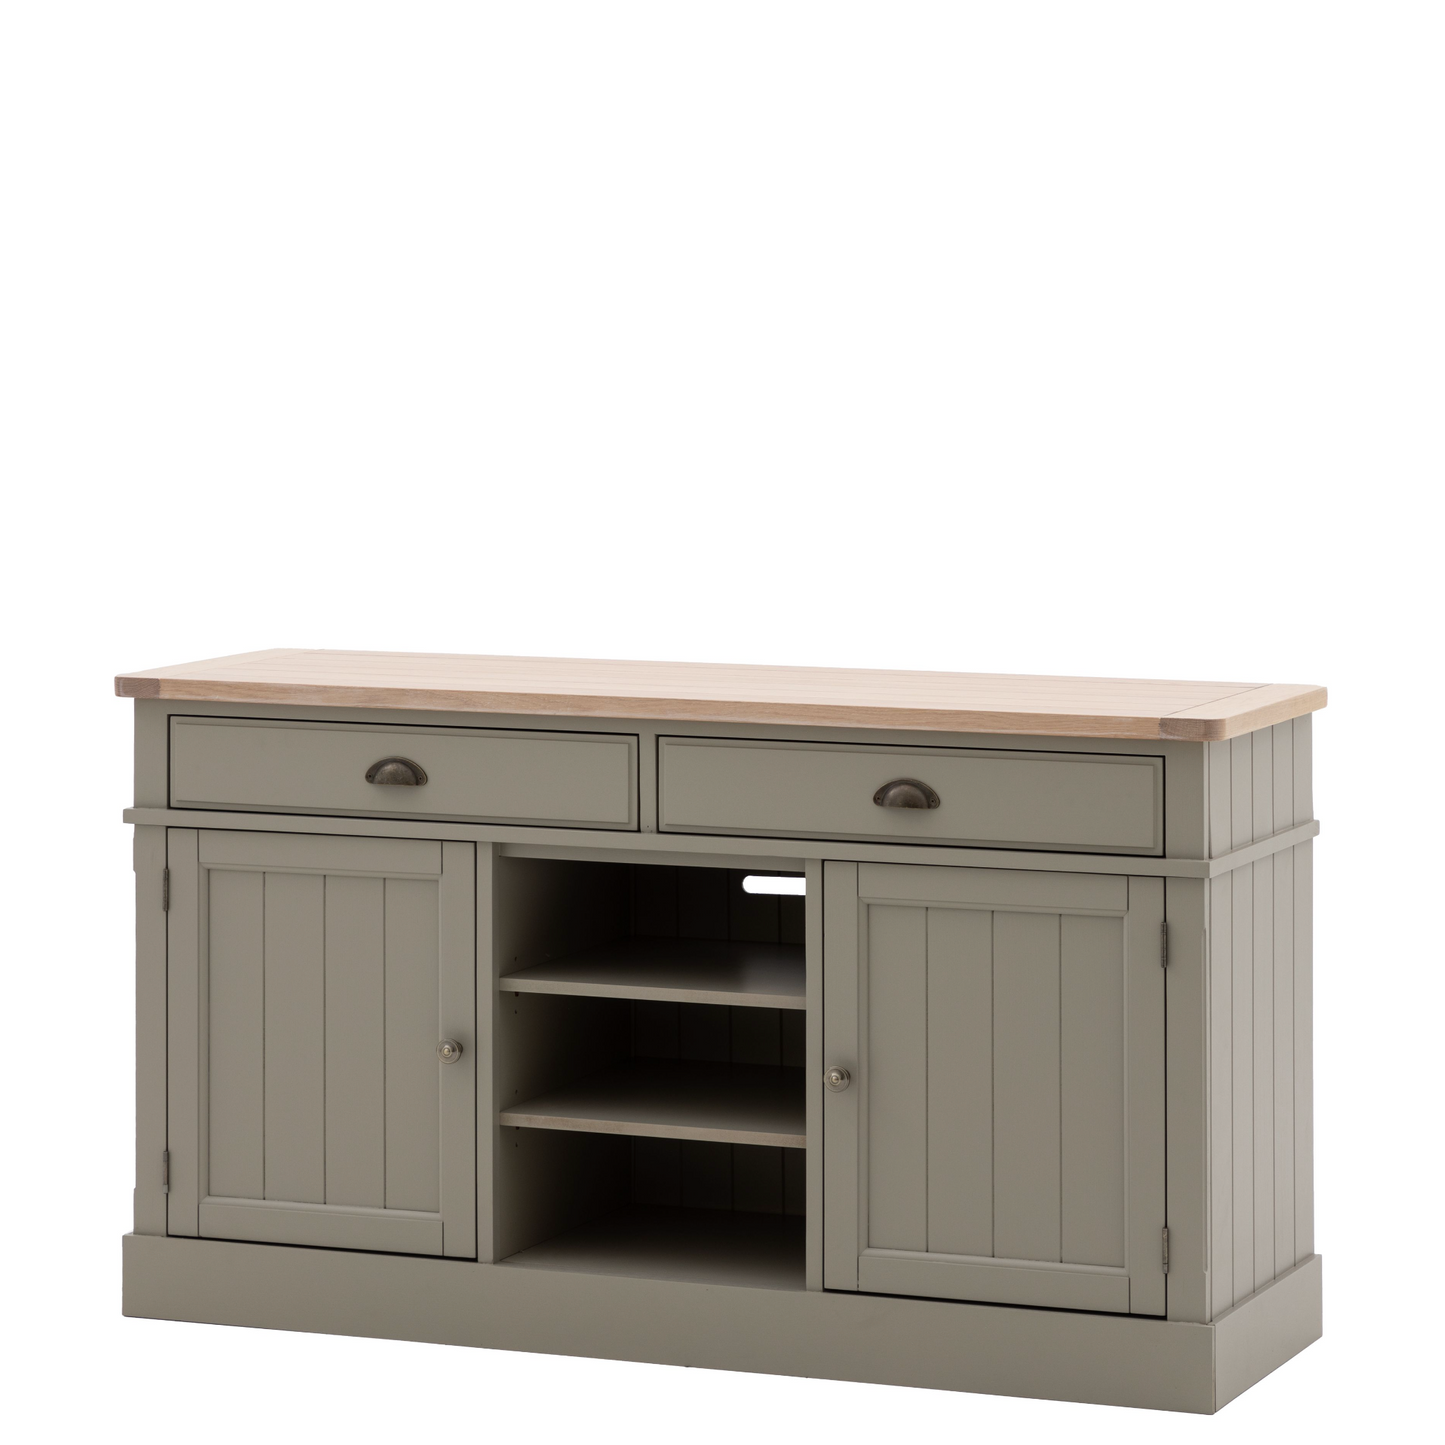 A Buckland 2 Door 2 Drawer Sideboard in Prairie for interior decor.